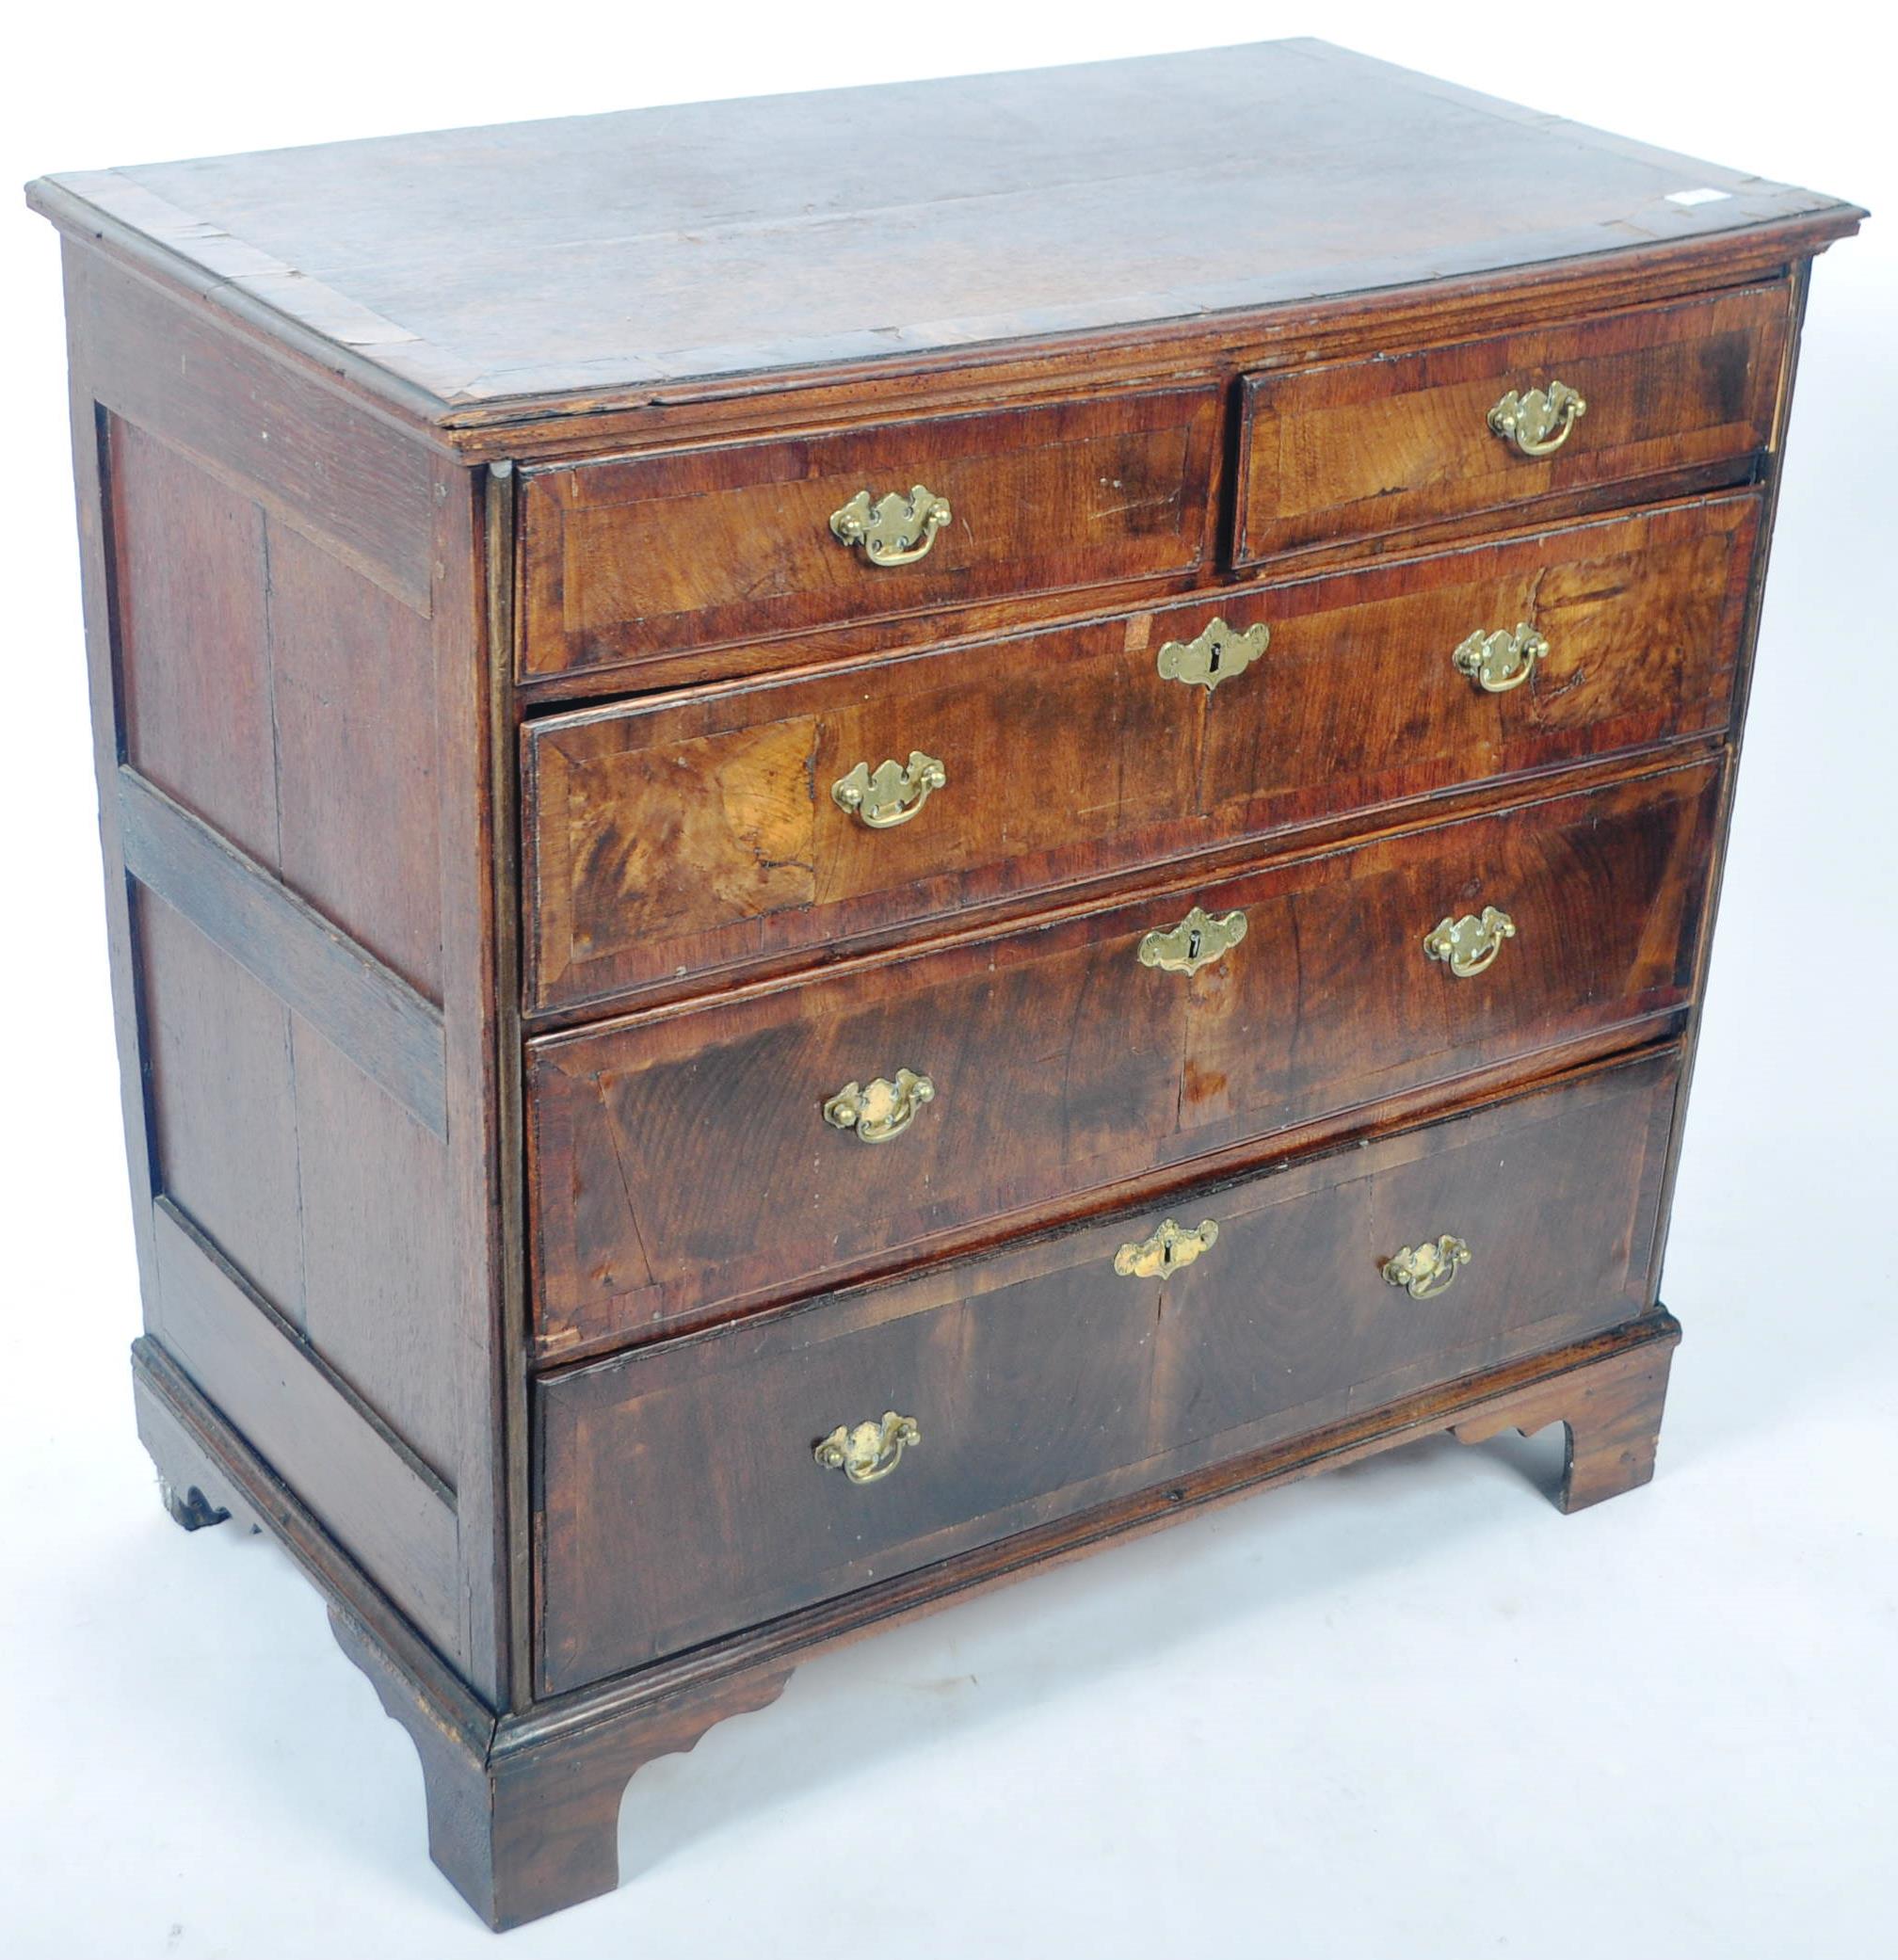 ANTIQUE 17TH CENTURY QUEEN ANNE WALNUT CHEST OF DRAWERS - Image 2 of 7